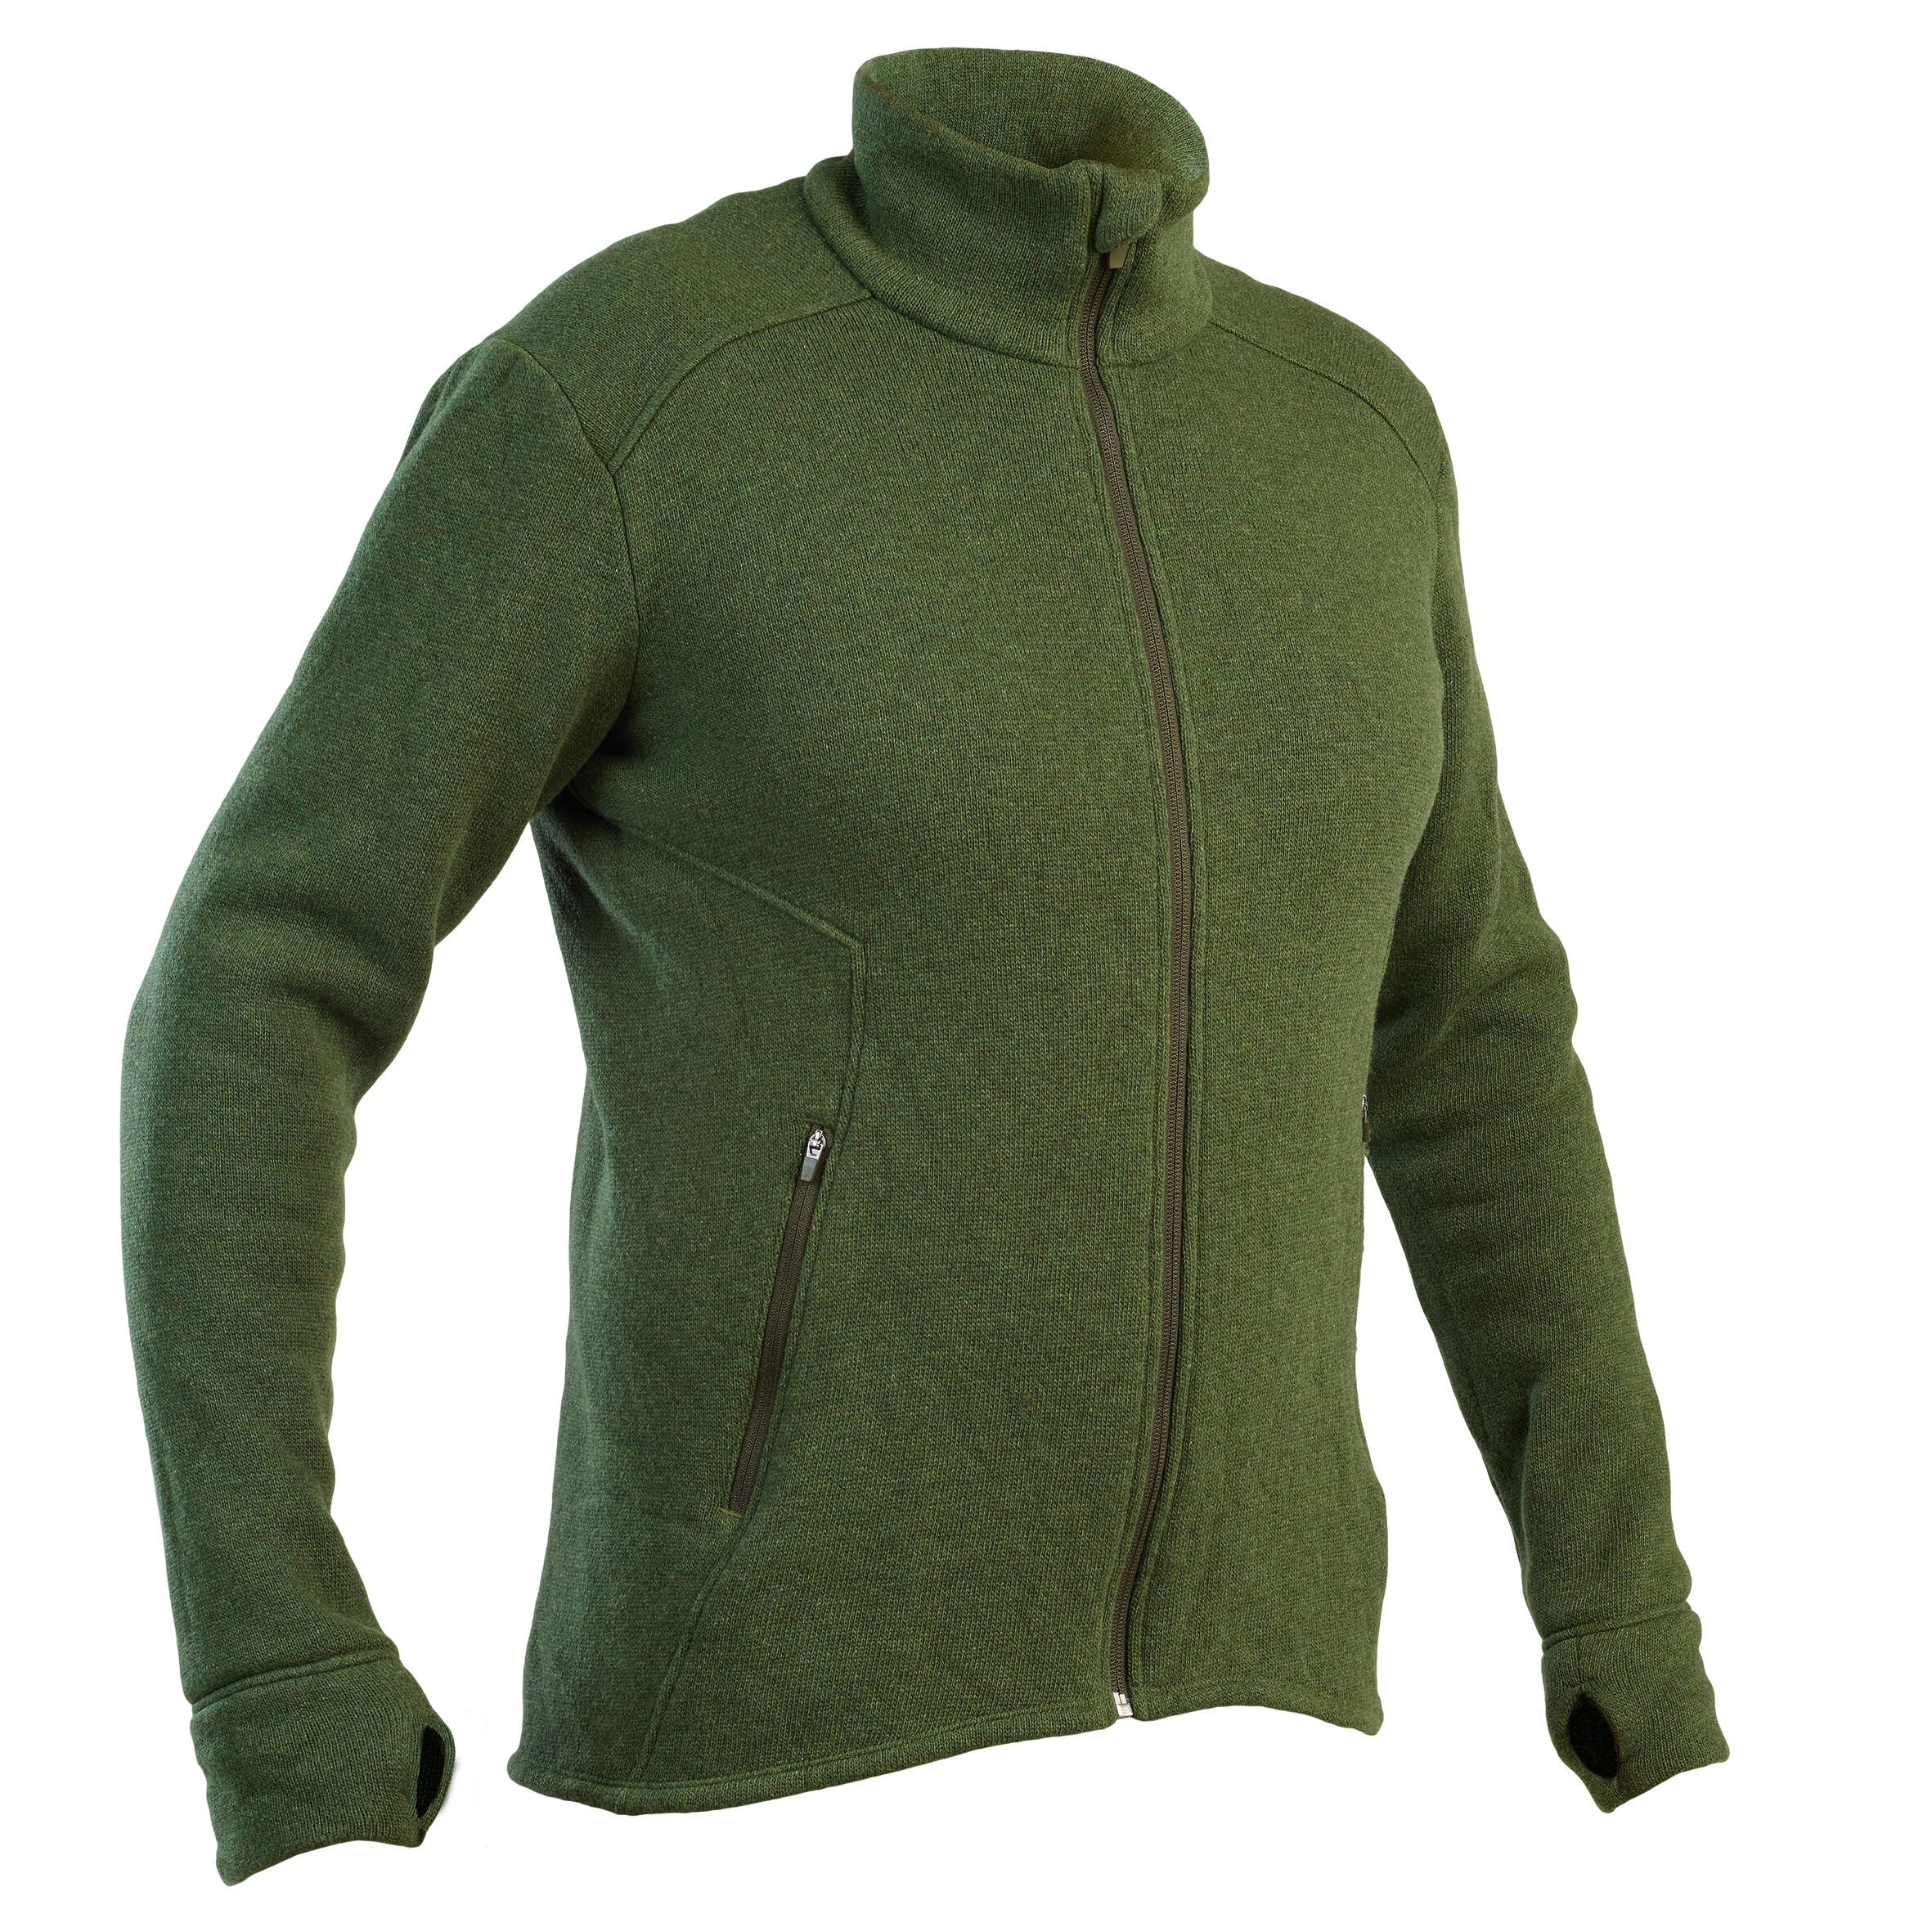 SOLOGNAC Warm breathable silent wool hunting jacket 900 - green